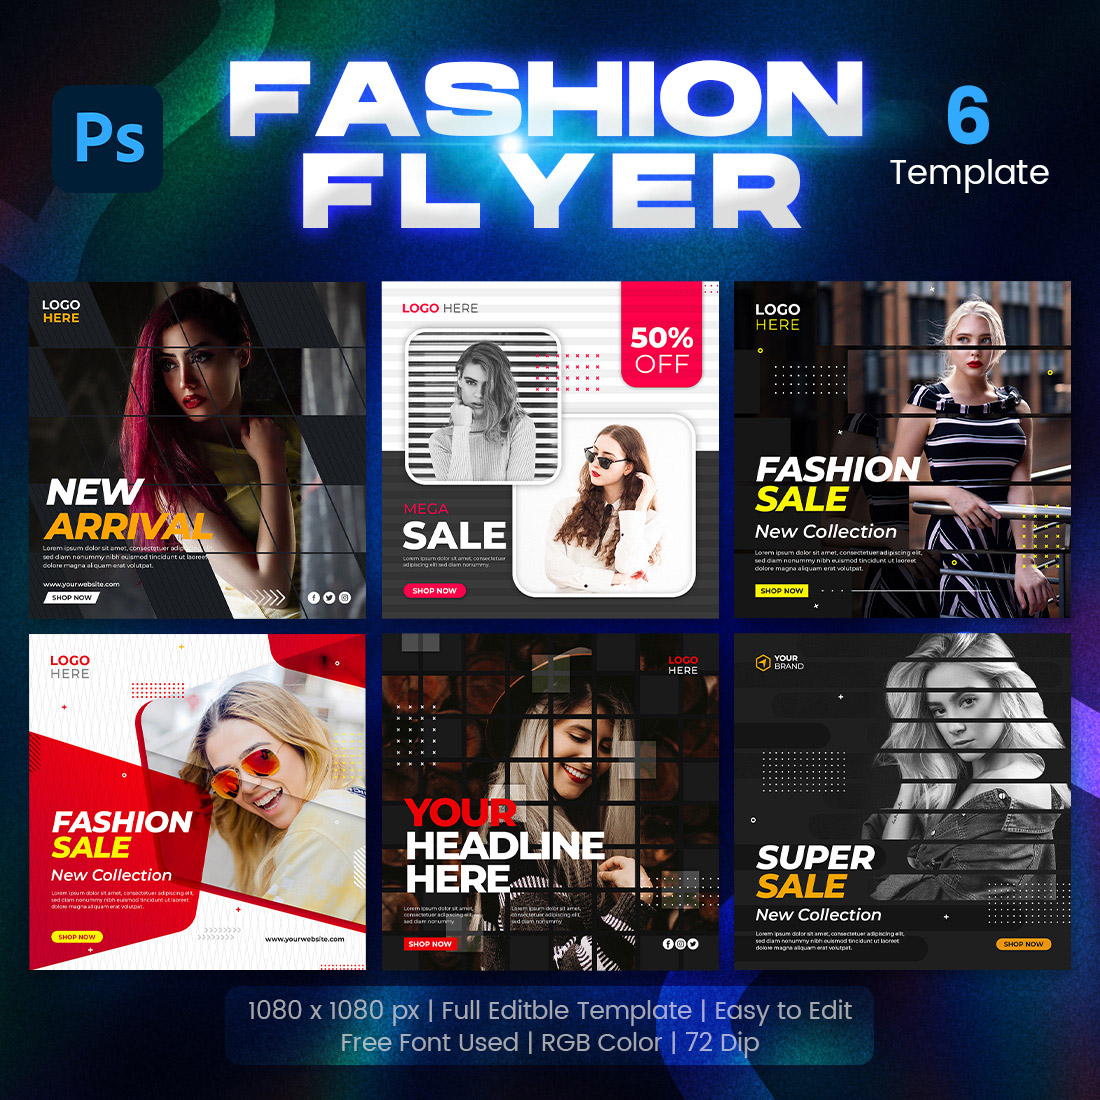 Fashion Sale Banner or Square Flyer for Social Media Post 6 Set Template main cover.